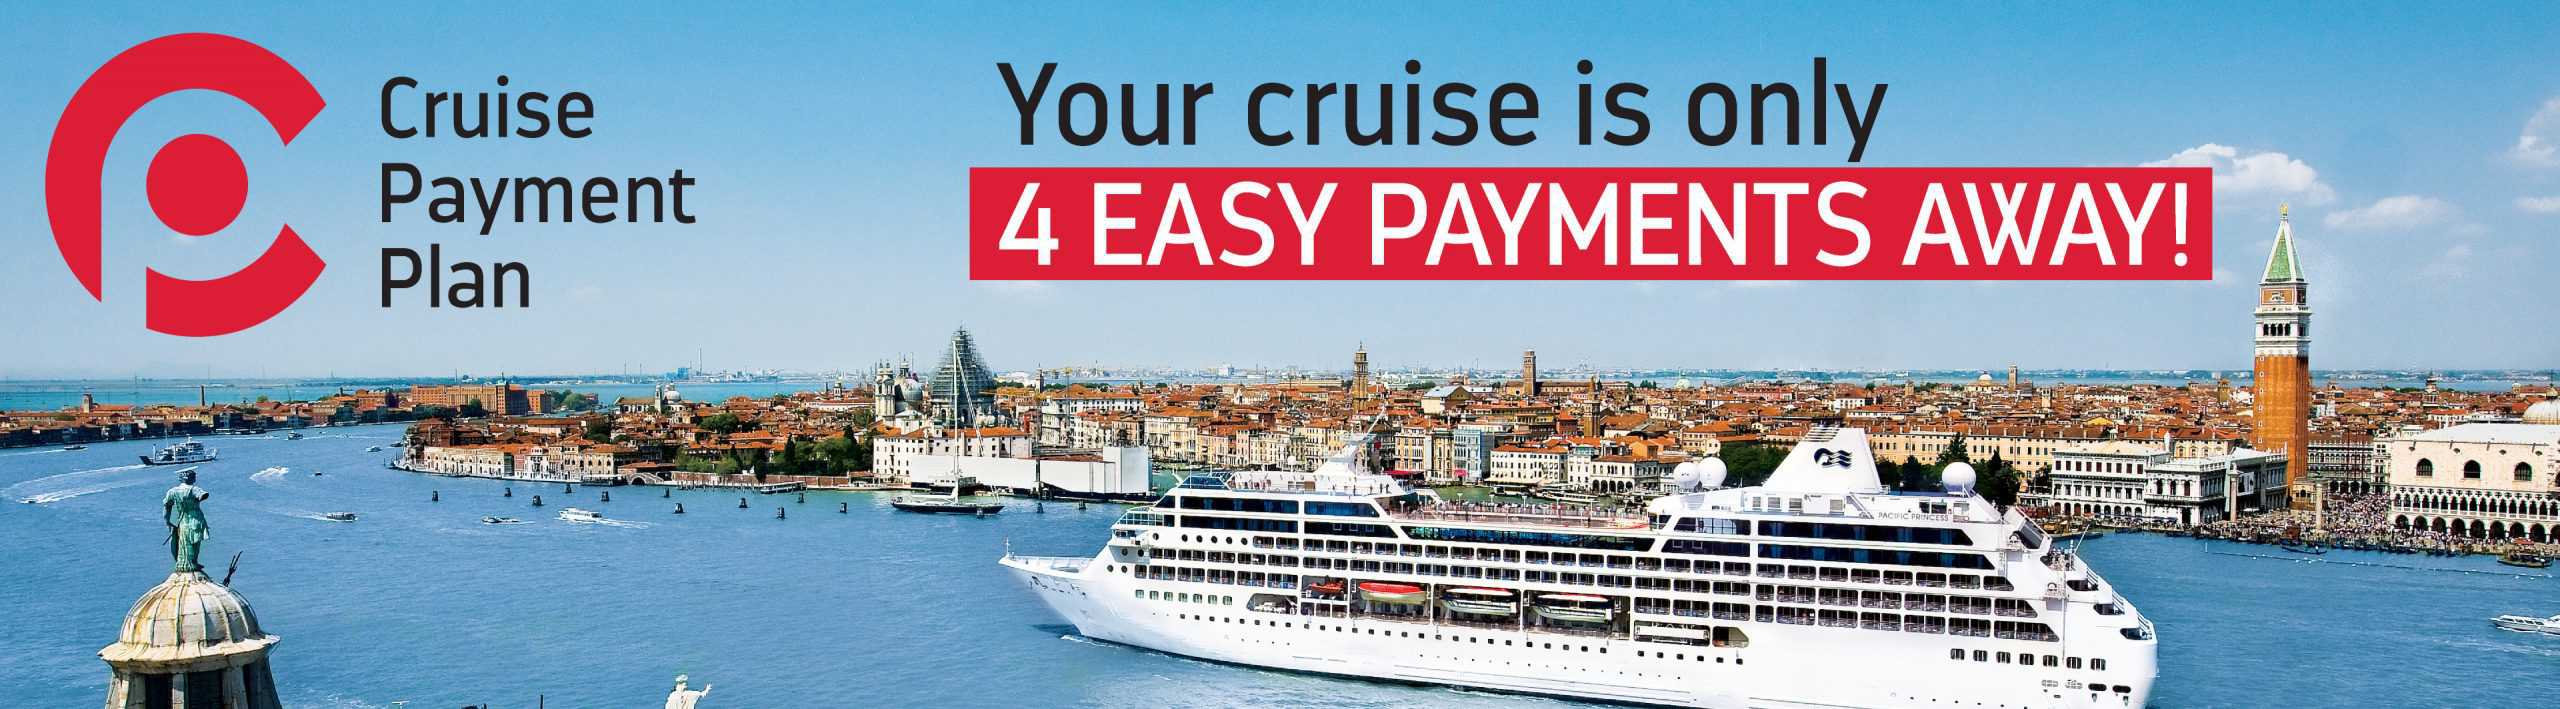 Cruise Payment Plan 4 Easy Payments Cruise Guru